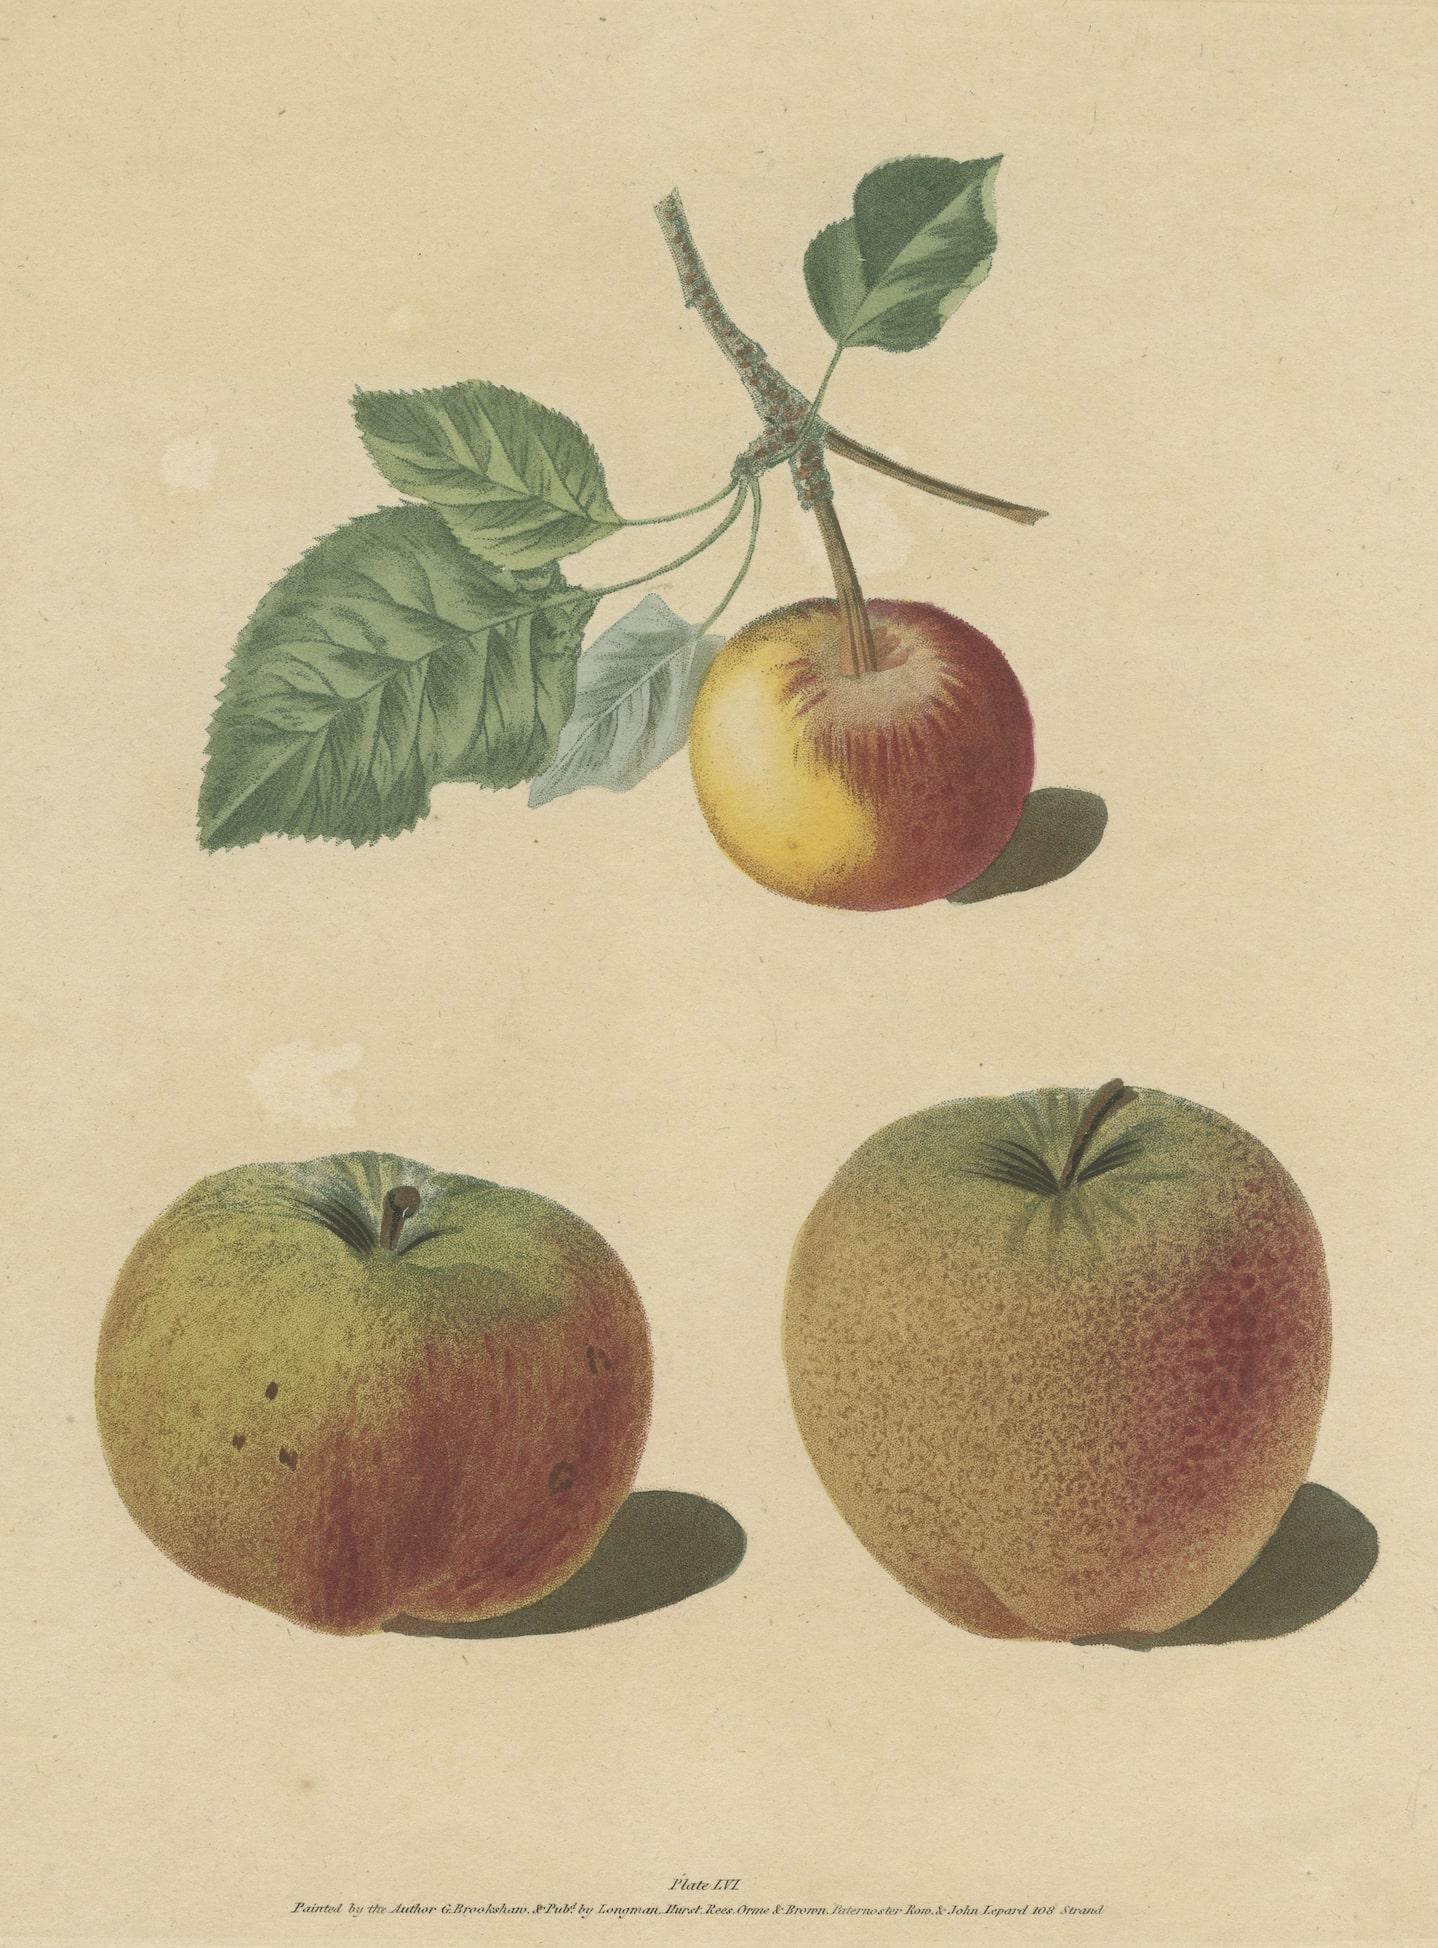 Handcoloured stipple engraving of an illustration by George Brookshaw. It shows Apple varieties, Malus domestica: Pomme d'Api, Padly's Pippin and Bigg's Nonsuch. This print originates from 'Pomona Britannica' published by Longman, Hurst, etc. 1817.